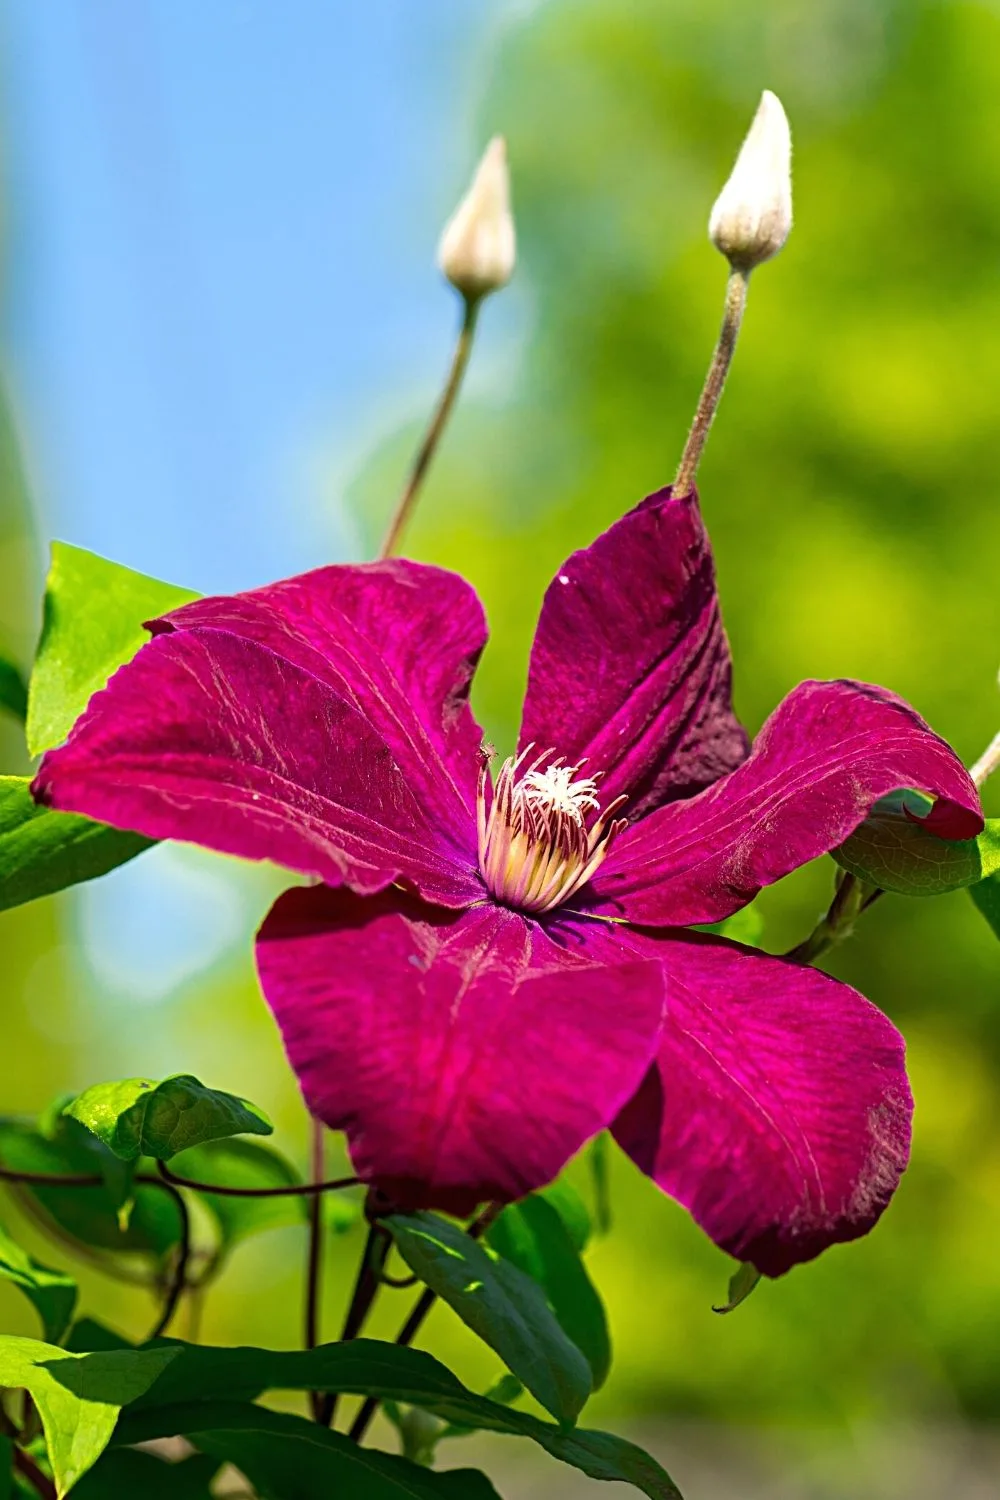 Clematis is a fast-growing and climbing plant that you can grow on the west-facing side of the house